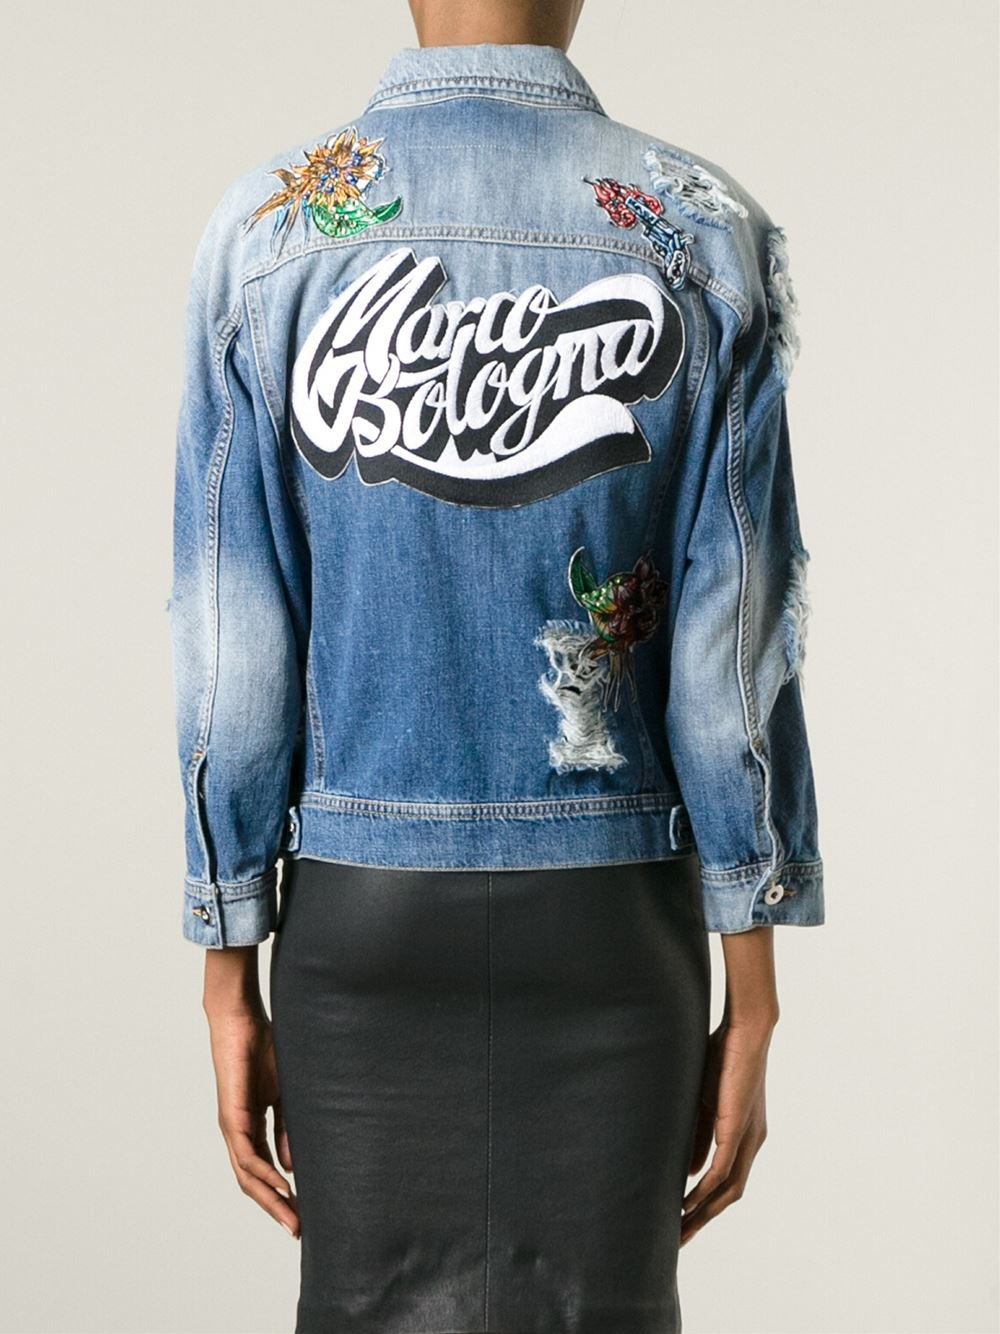 Marco bologna Embroidered Distressed Denim Jacket in Blue | Lyst